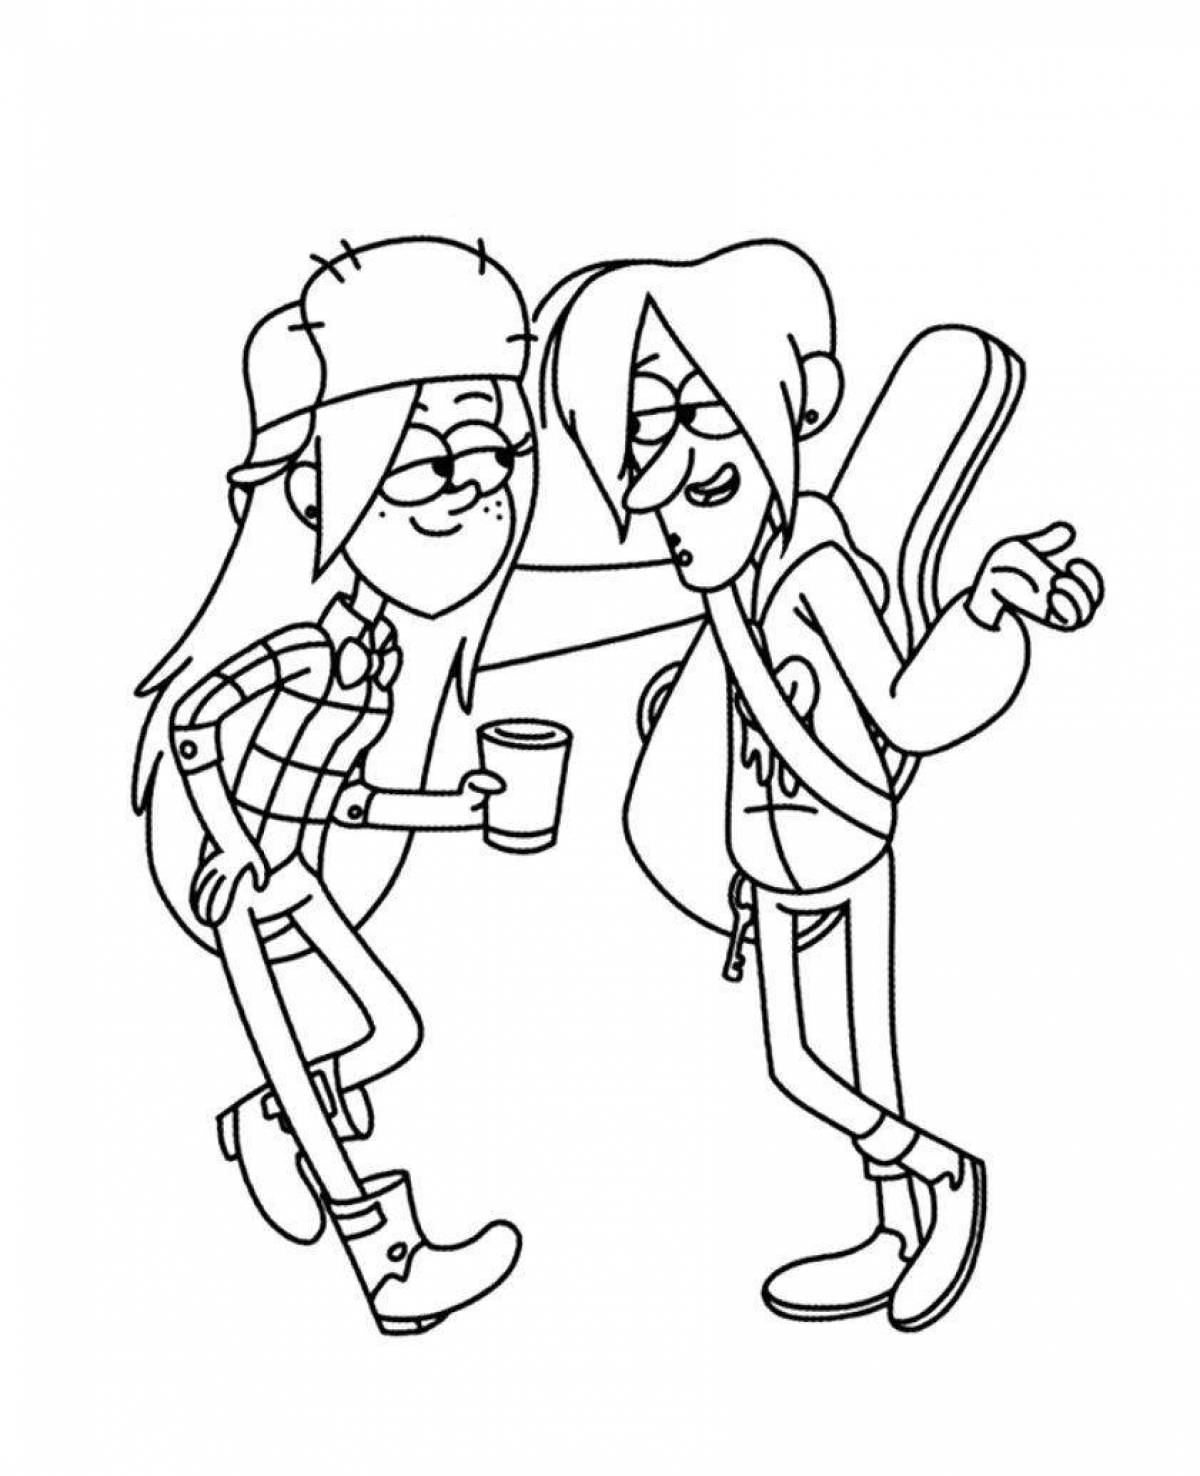 Wendy's Gravity Falls Coloring Page